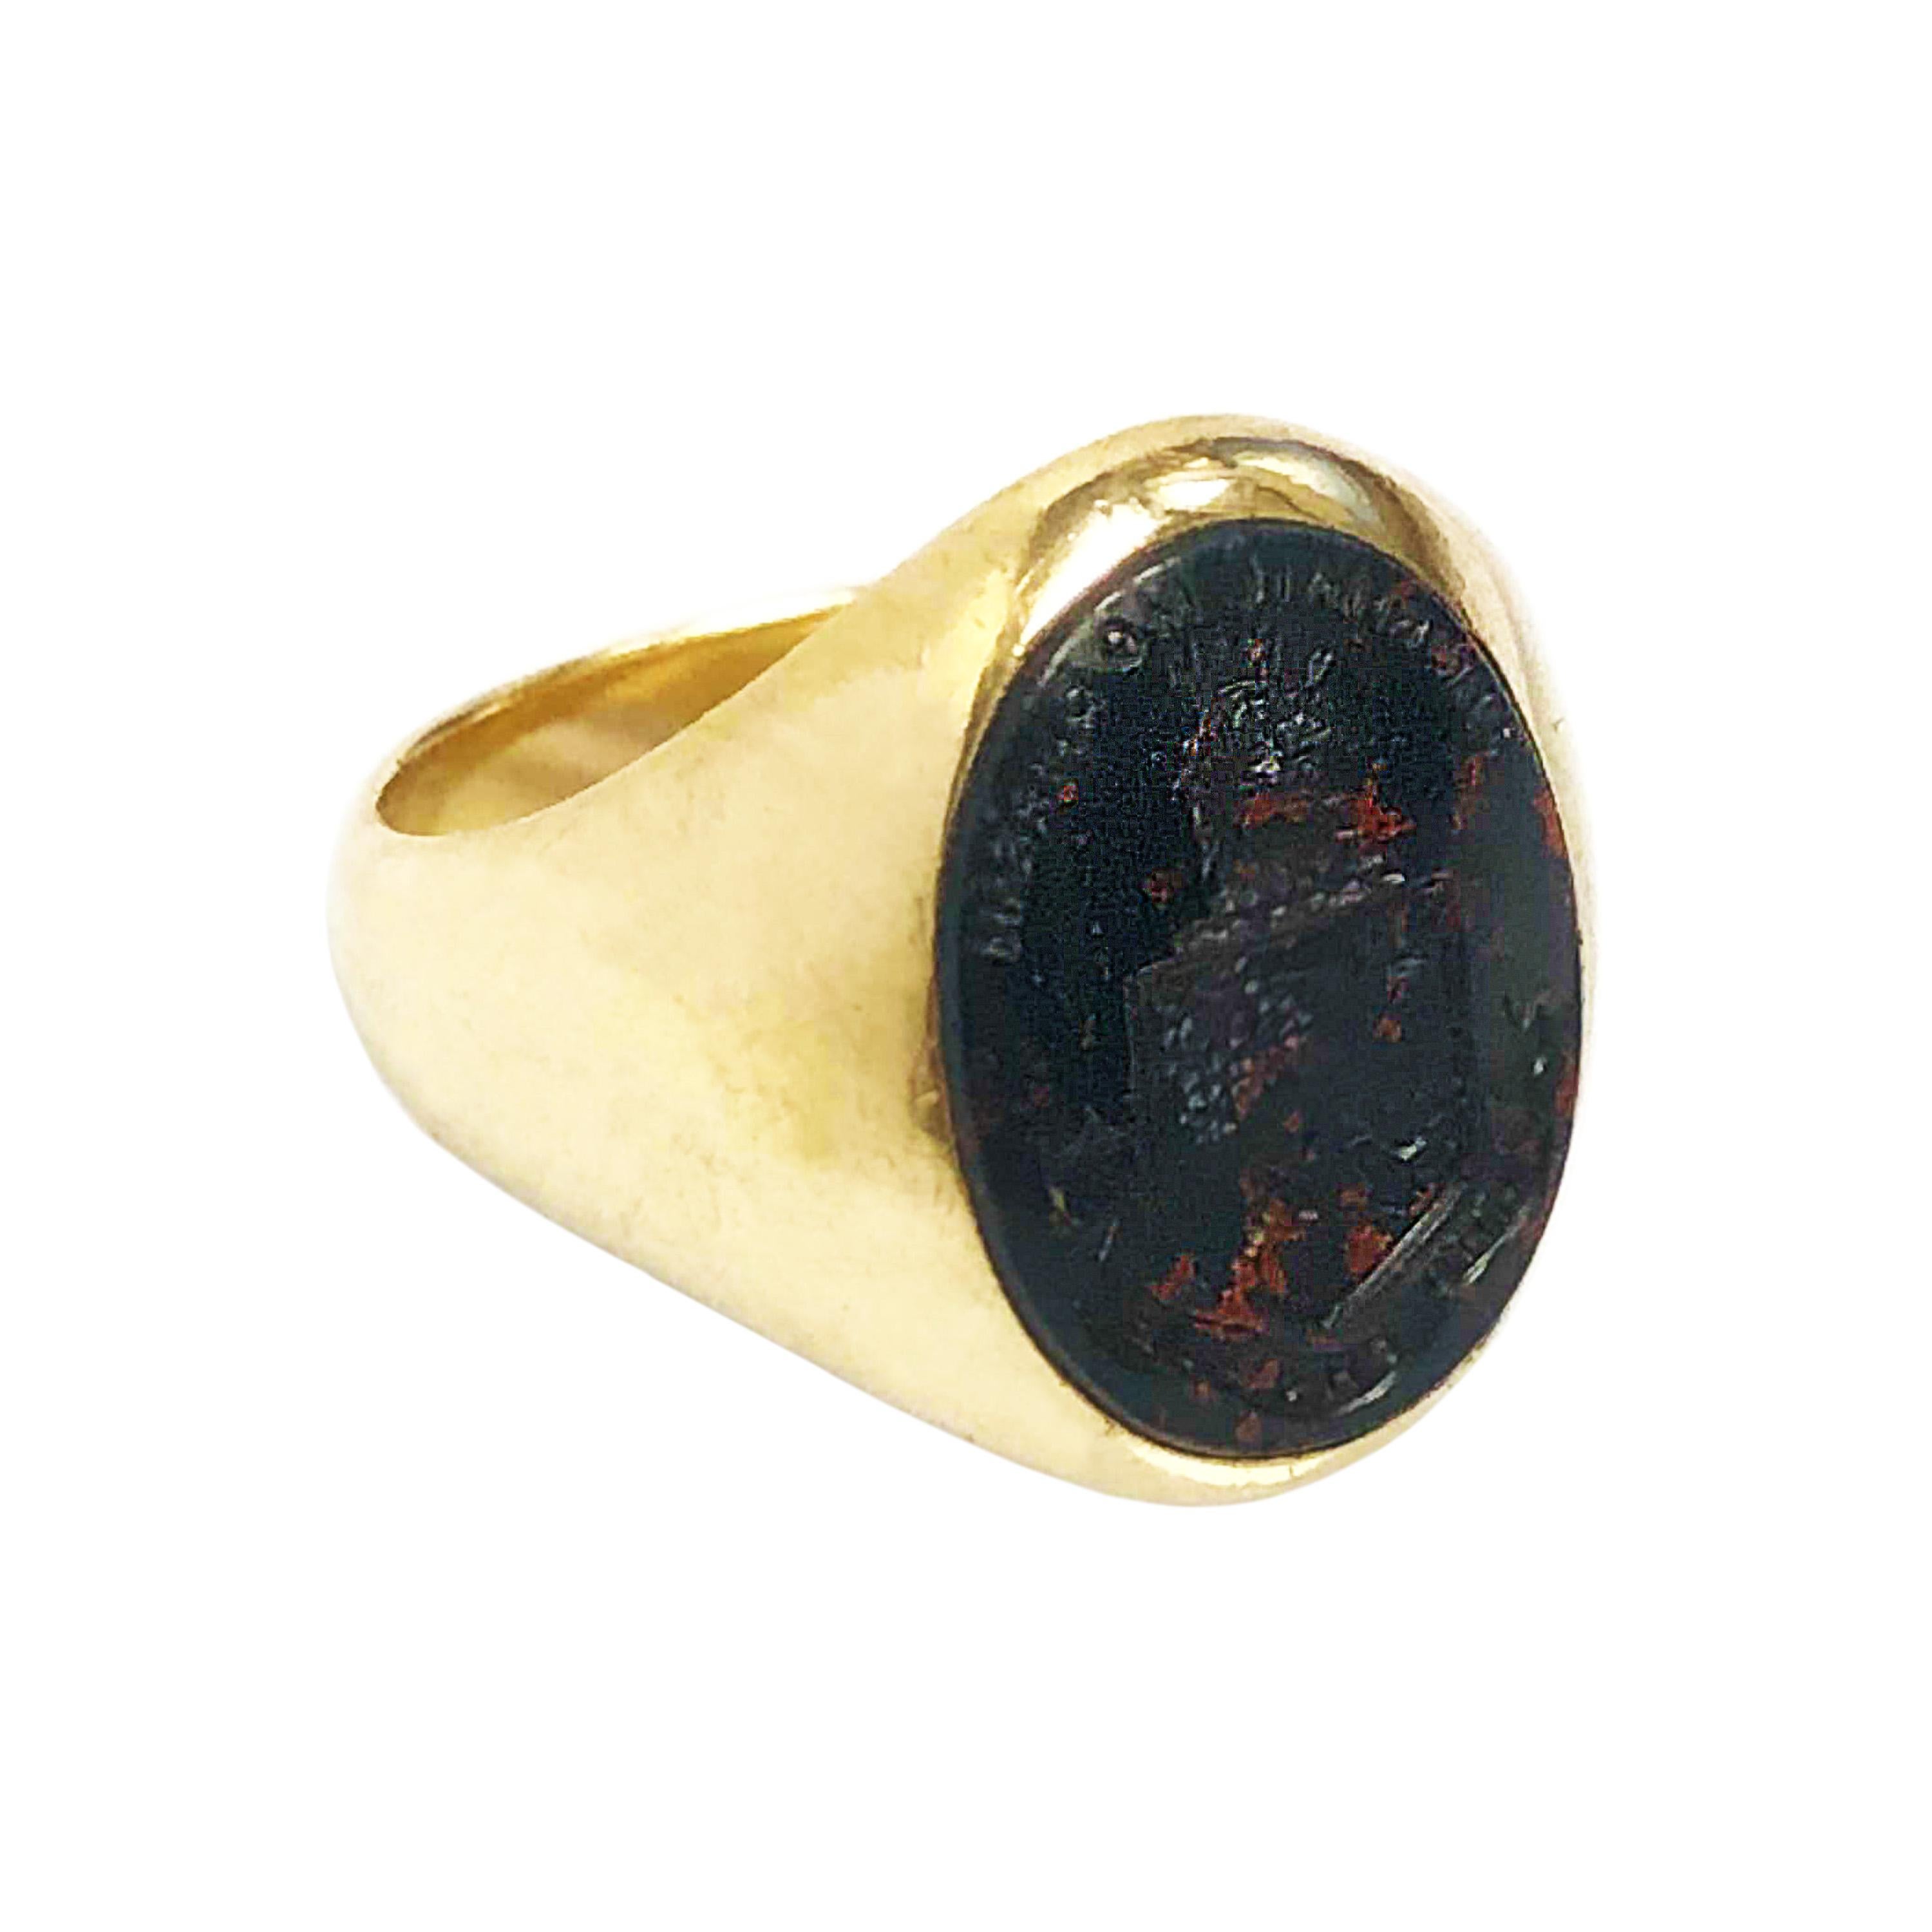 Circa 1910 Gents 18K Yellow Gold Signet Ring by Bailey Banks & Biddle. Centrally set with a carved oval Blood Stone featuring a Family Crest. The stone measures 16 X 11 MM. Finger size 7 1/2 